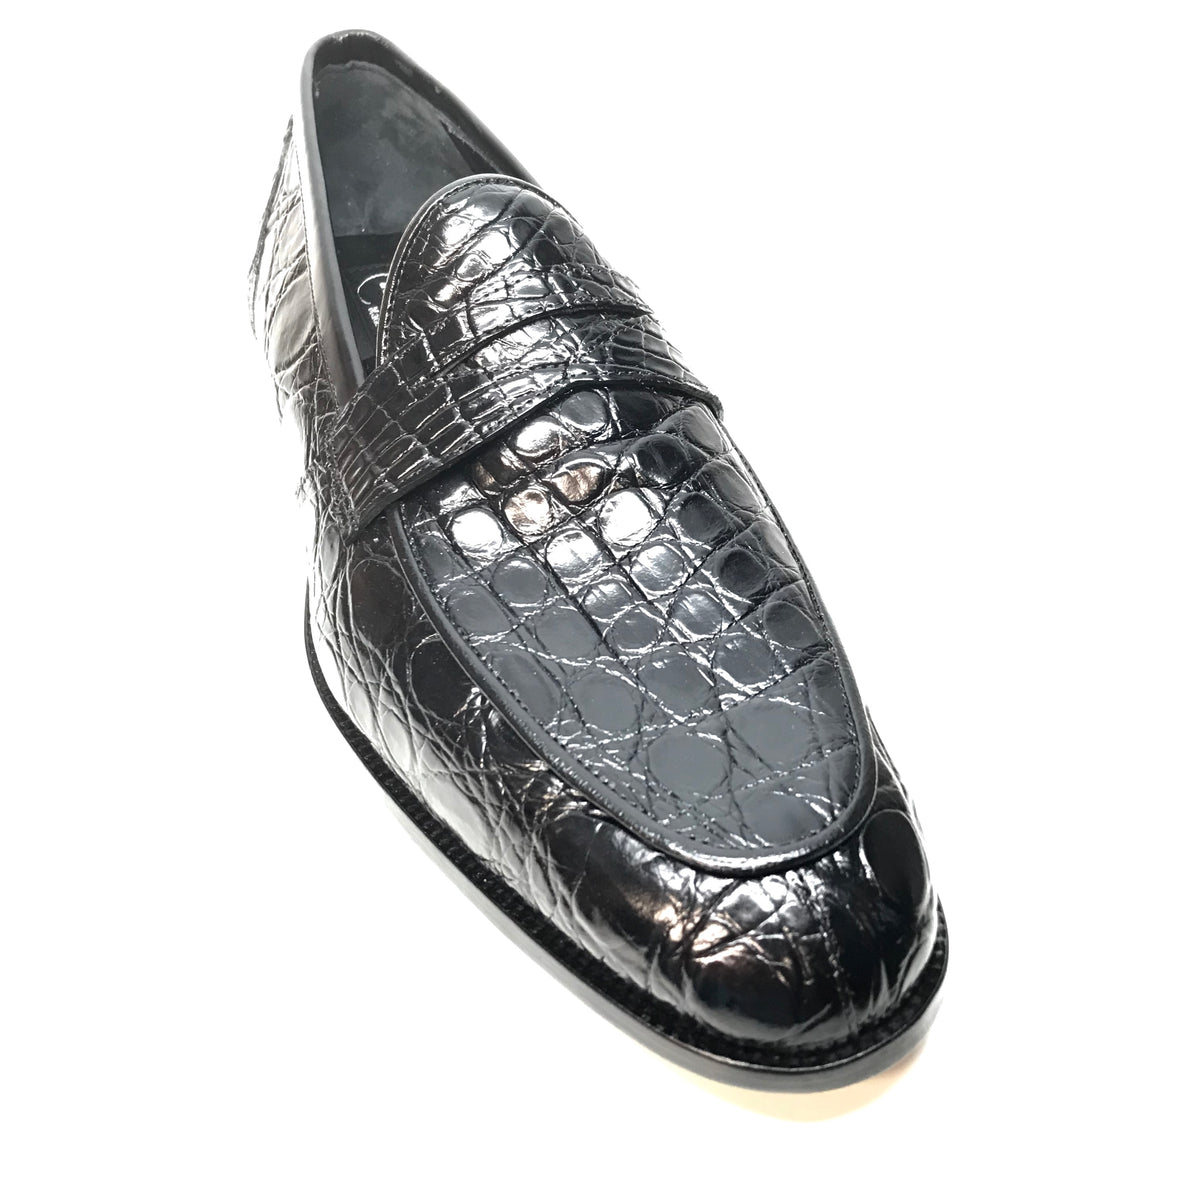 Mauri 4862 Black Crocodile Belly Penny Loafers - Dudes Boutique